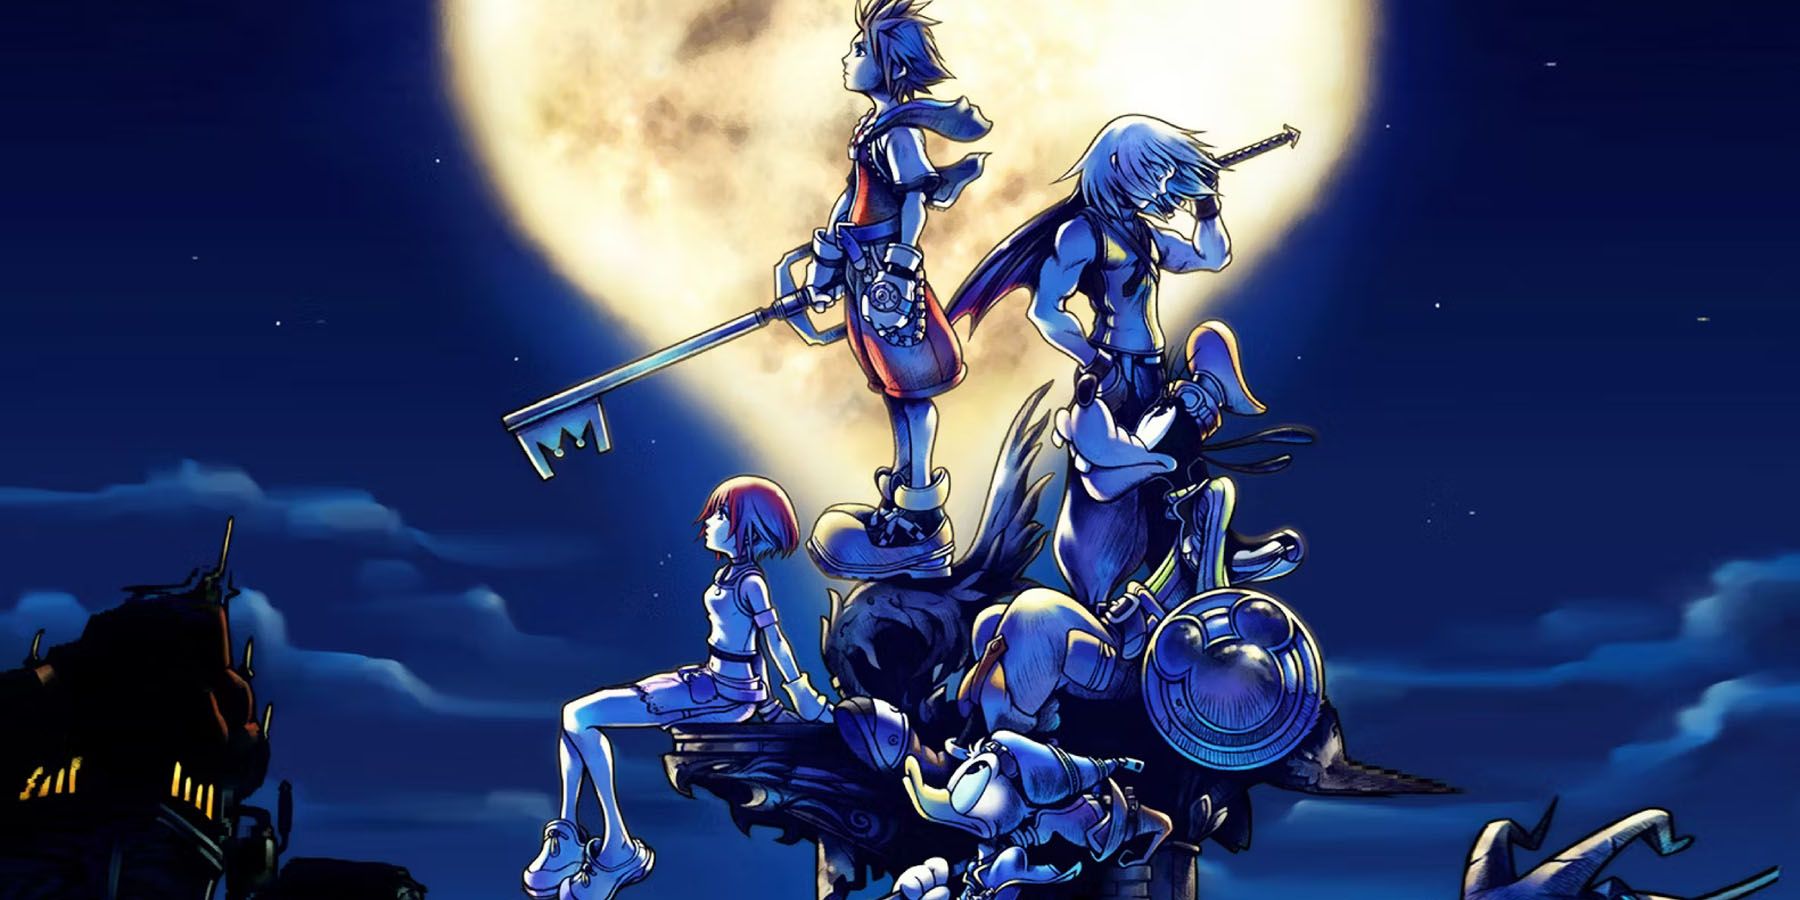 A promotional image for Kingdom Hearts, featuring Sora and his friends sitting under a heart-shaped moon at night.